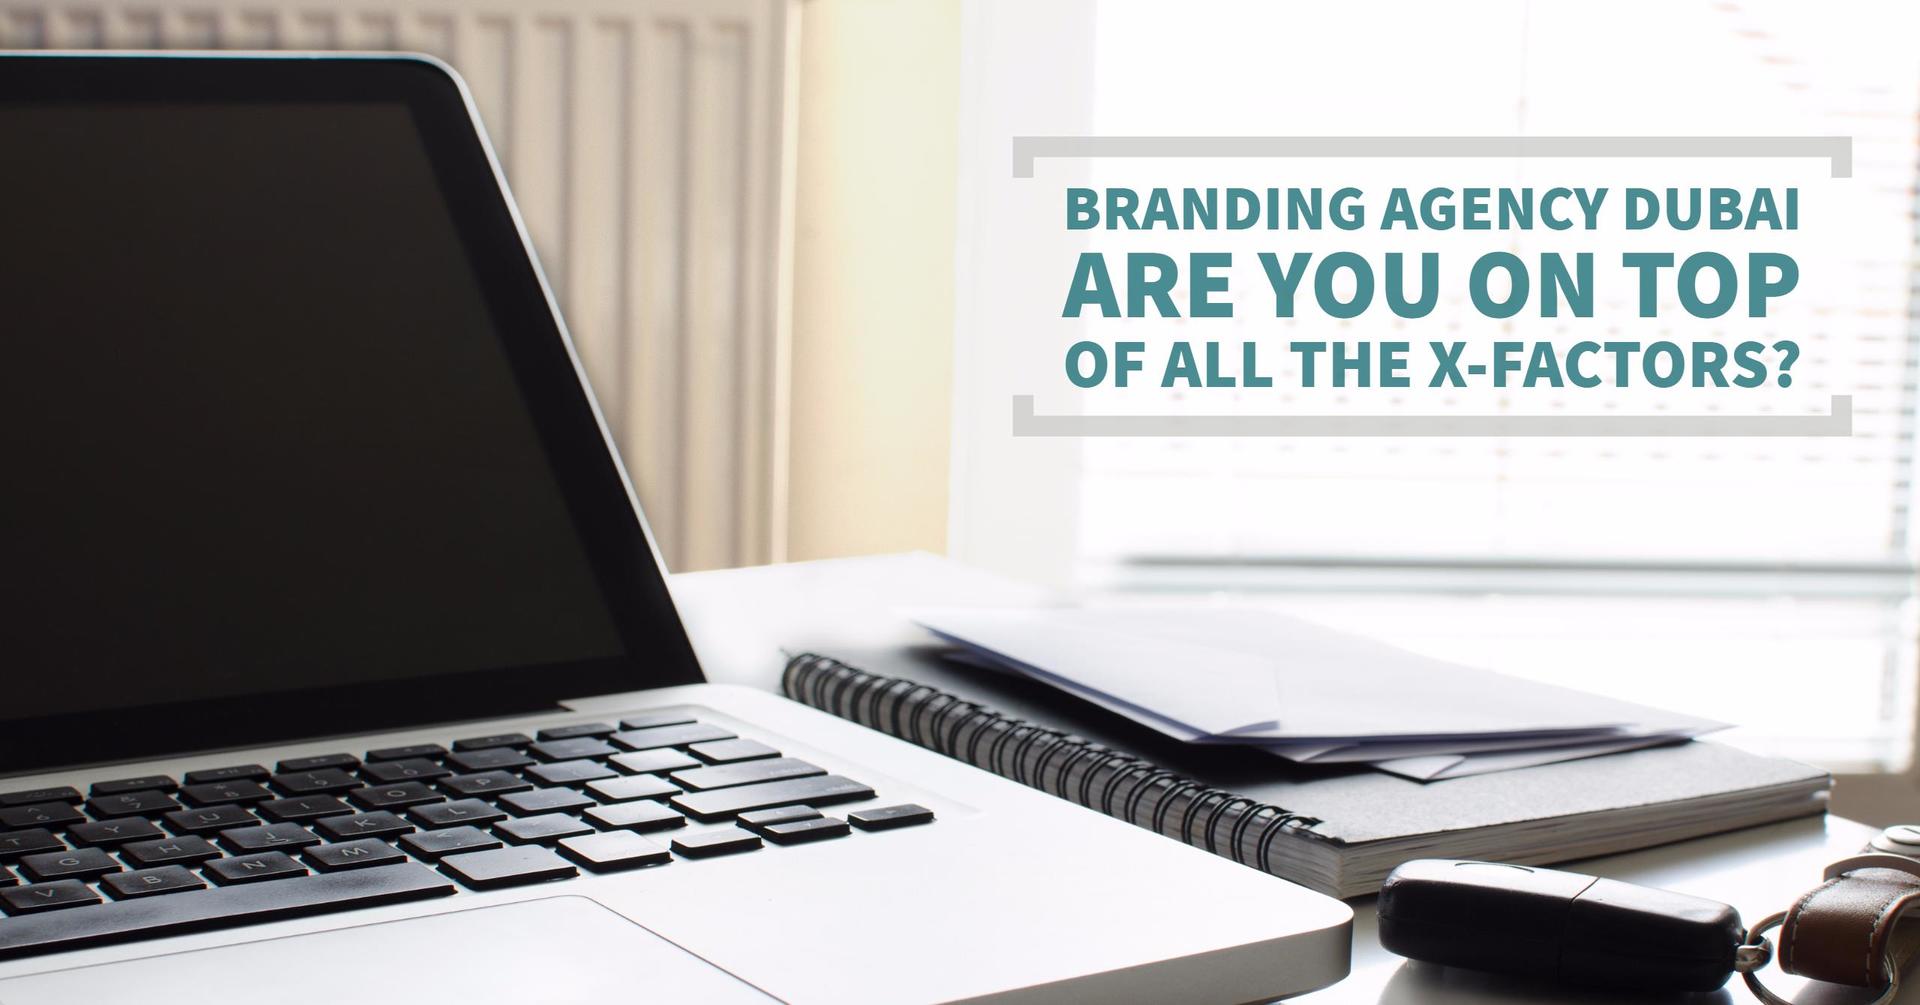 Branding Agency Dubai - Are You On Top Of All The X-Factors